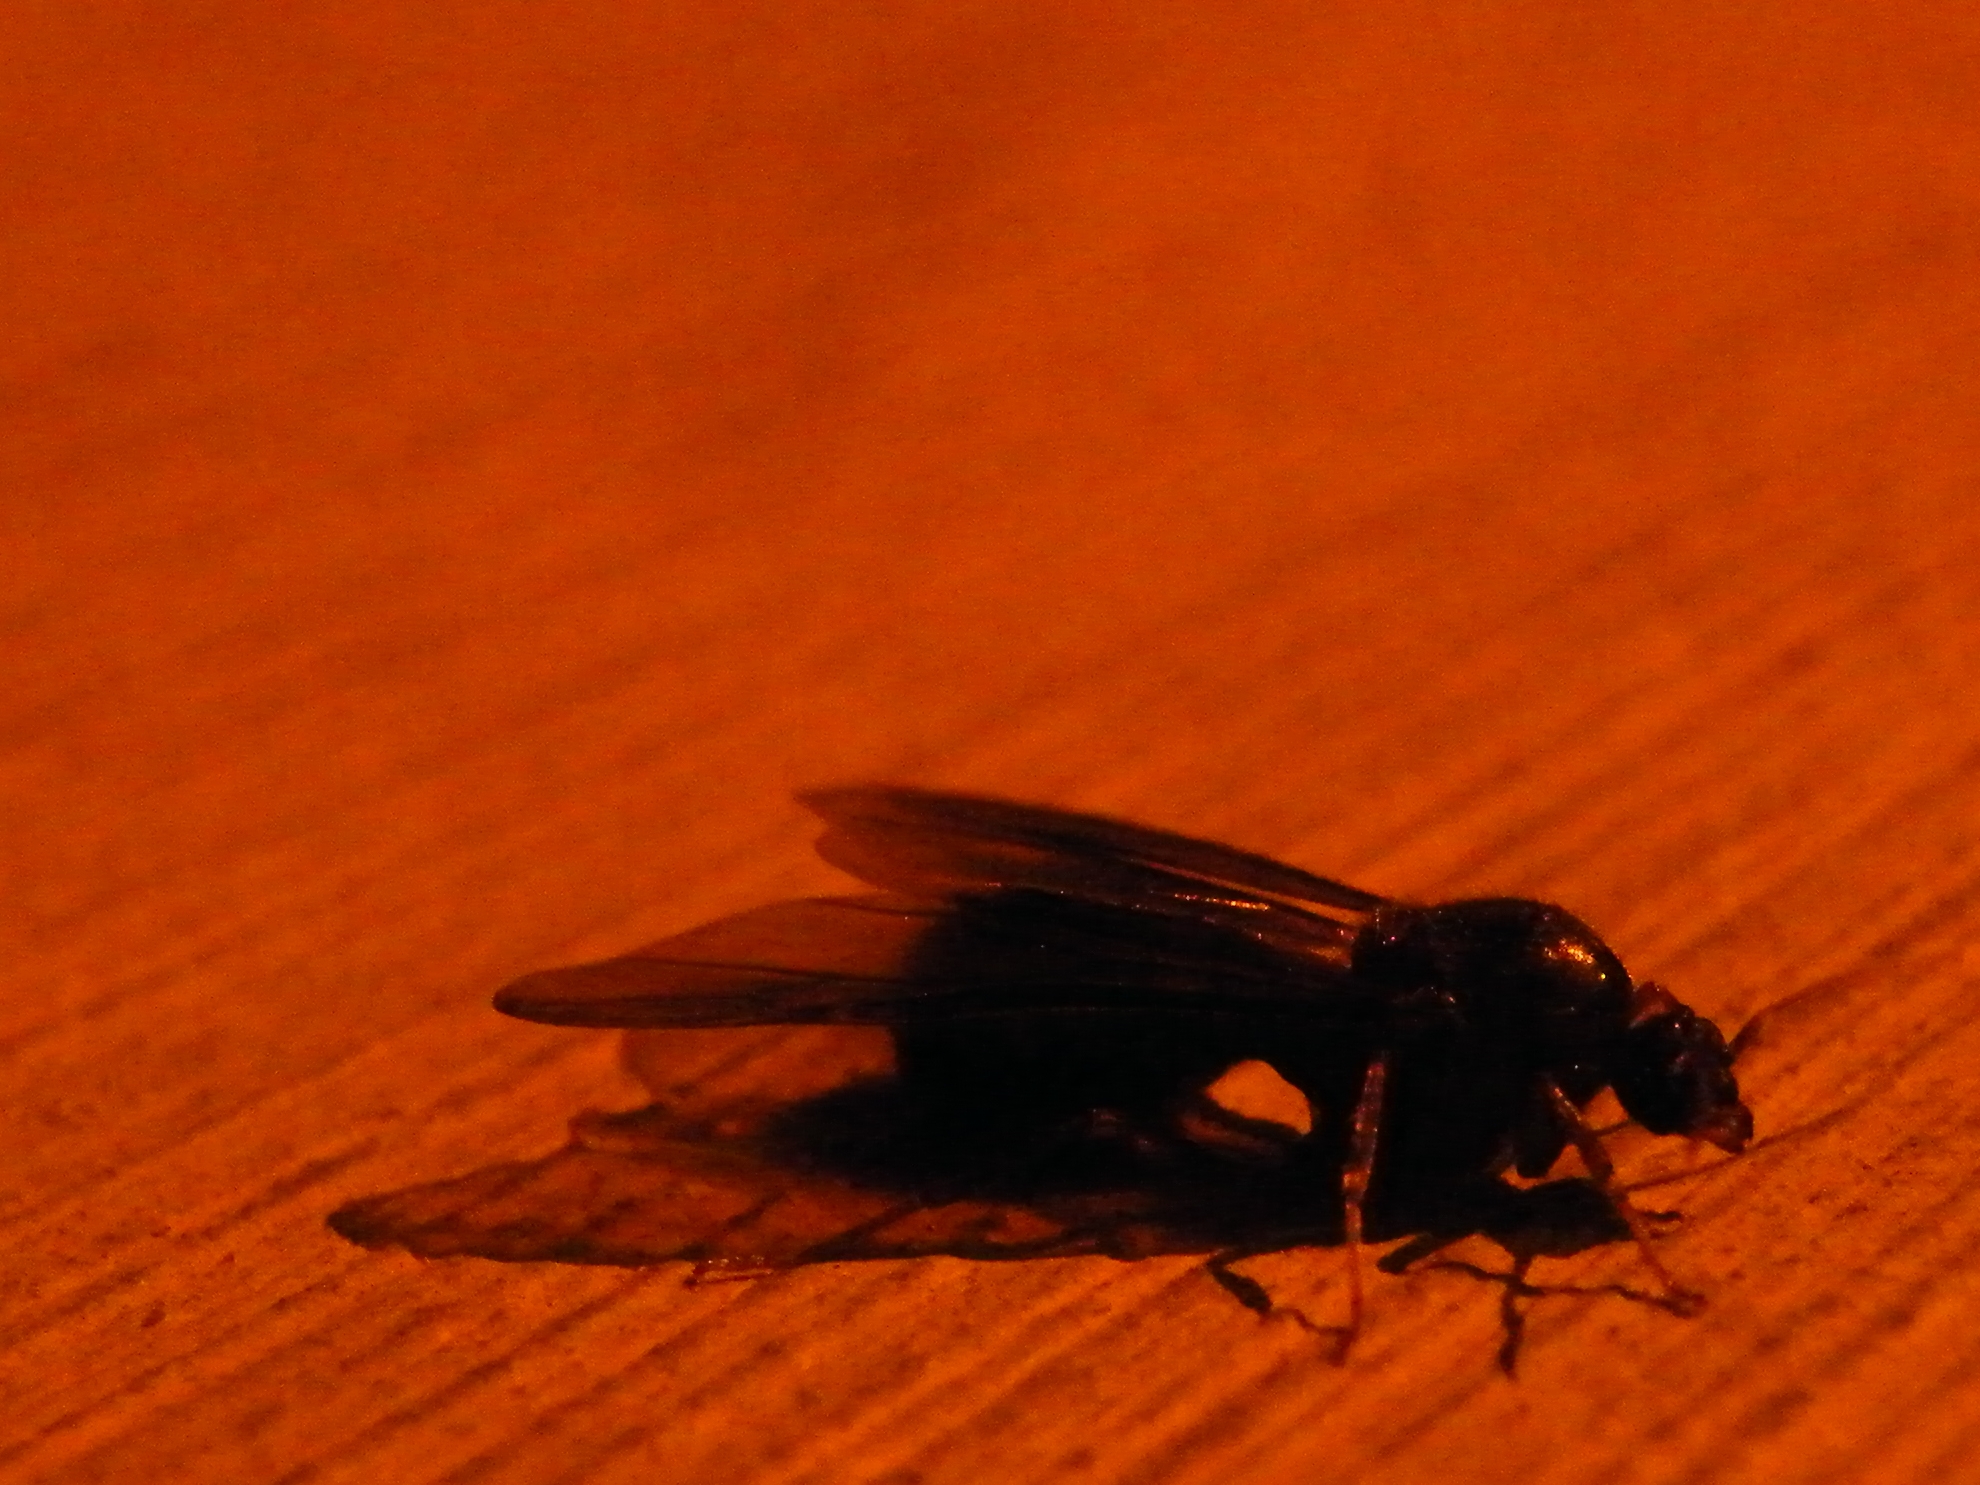 two flies sitting on top of a wooden surface